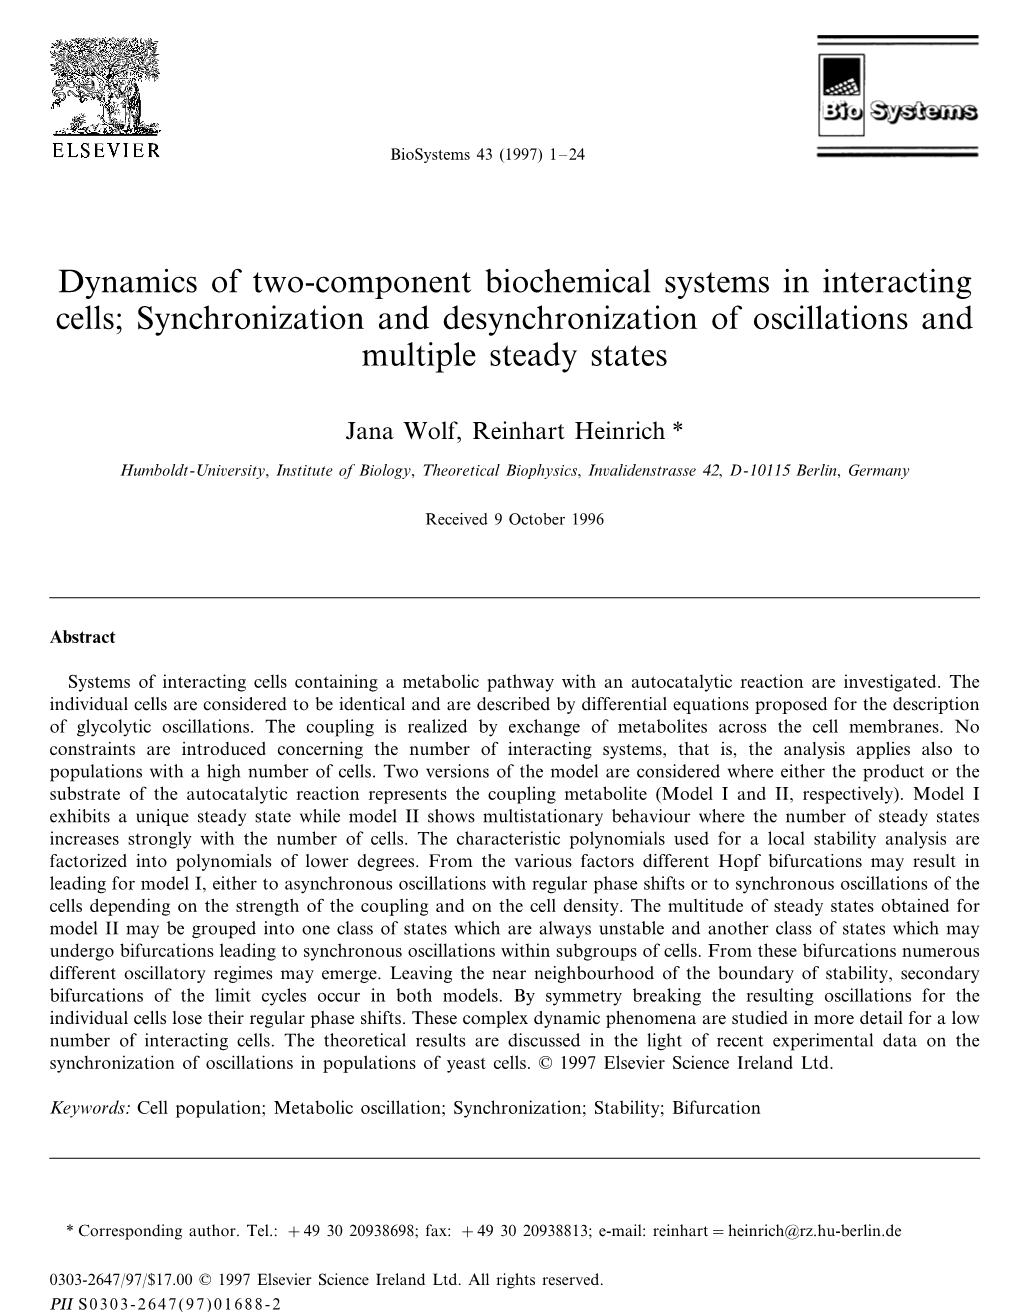 Dynamics of Two-Component Biochemical Systems in Interacting Cells; Synchronization and Desynchronization of Oscillations and Multiple Steady States